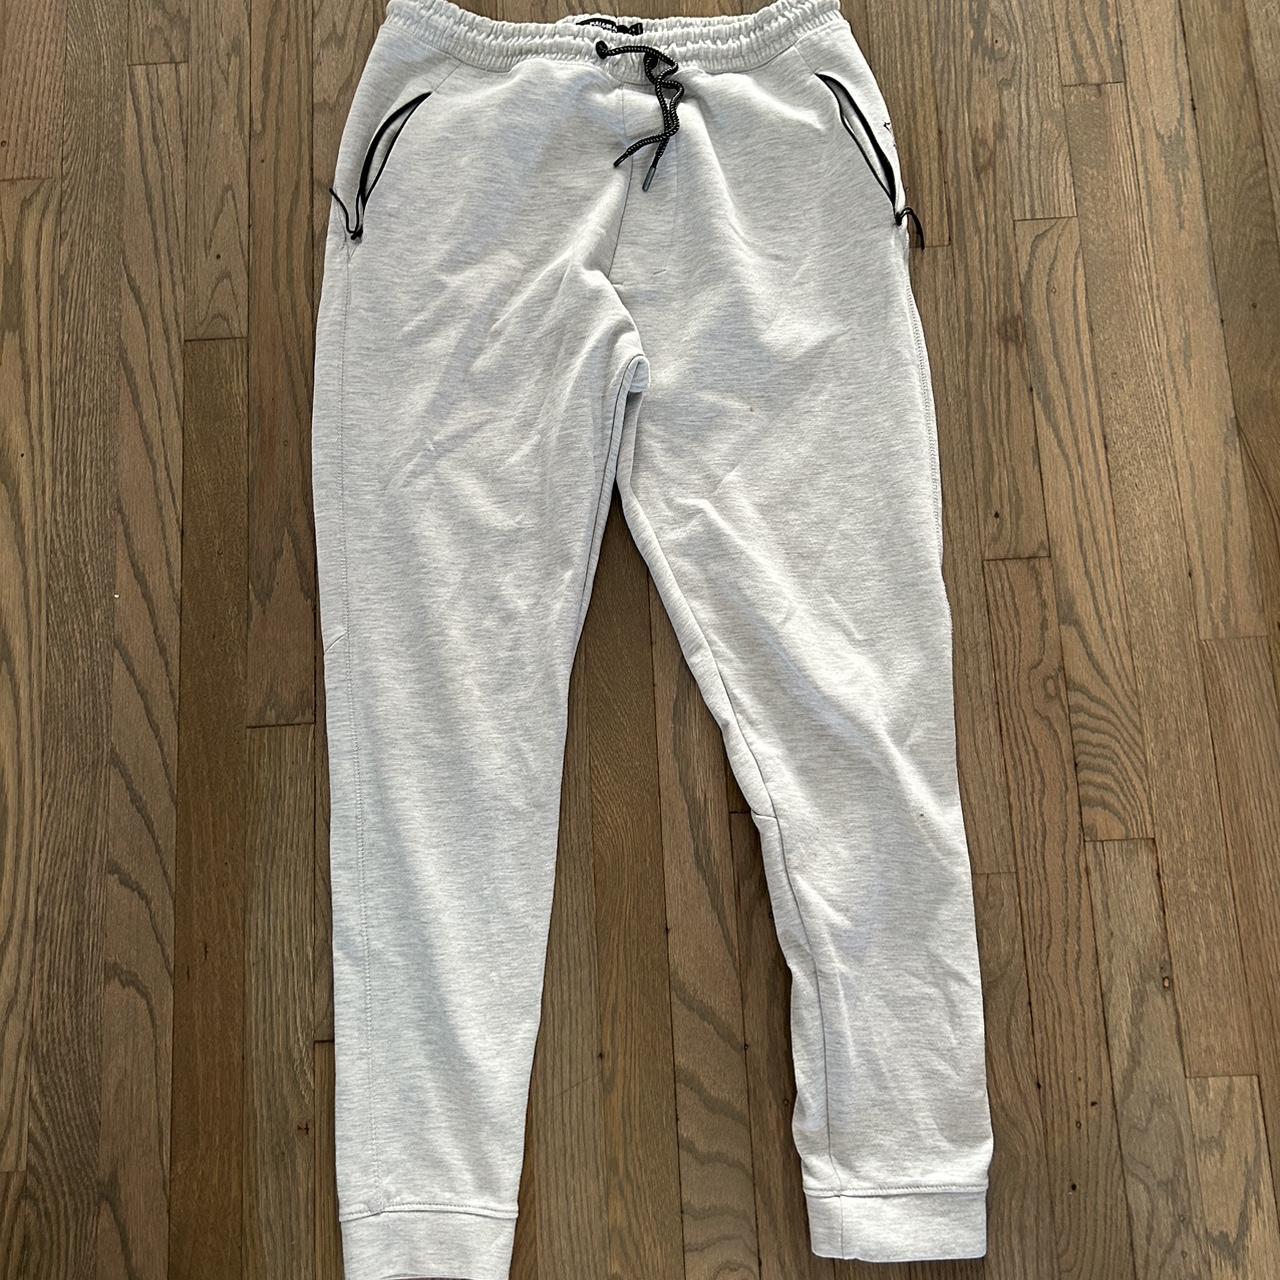 PULL&BEAR SWEATPANTS - Great quality and fit -Good... - Depop